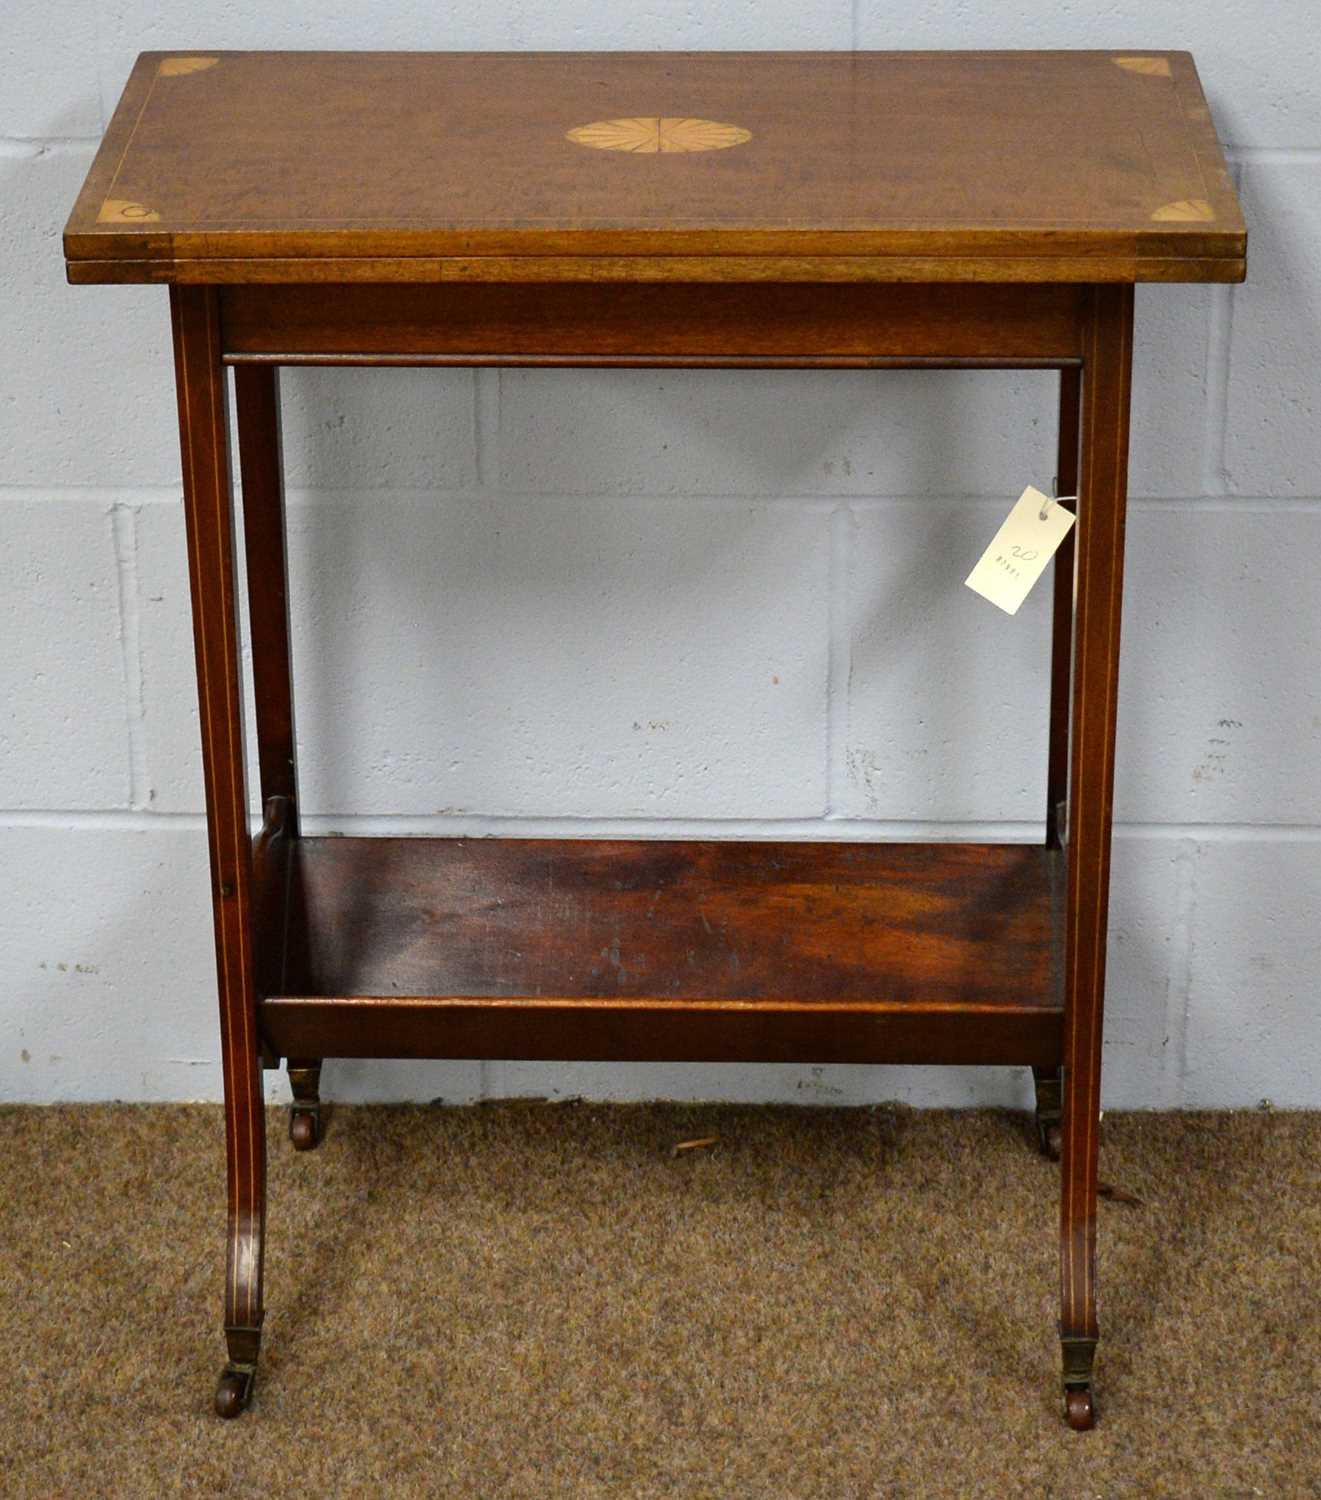 Lot 49 - An Edwardian fold-over card table of small proportions